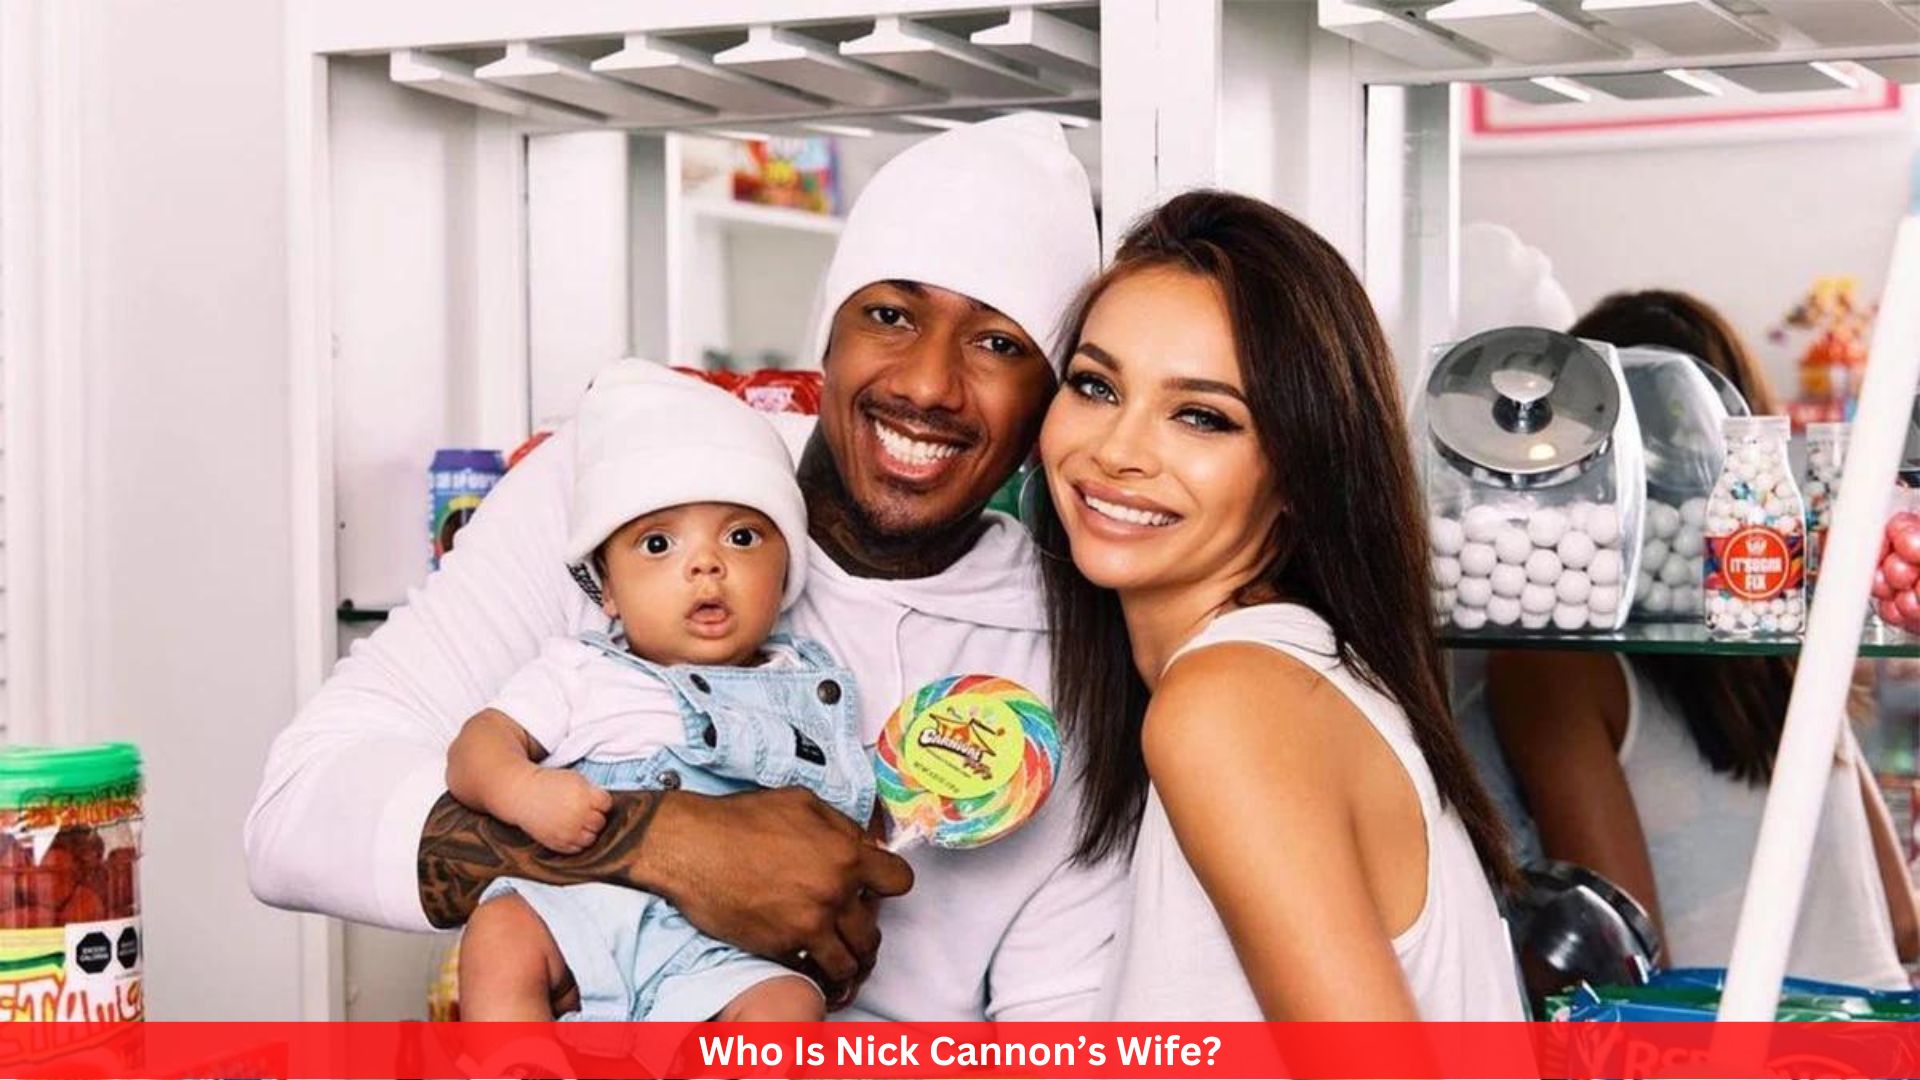 Who Is Nick Cannon’s Wife? Details Inside!